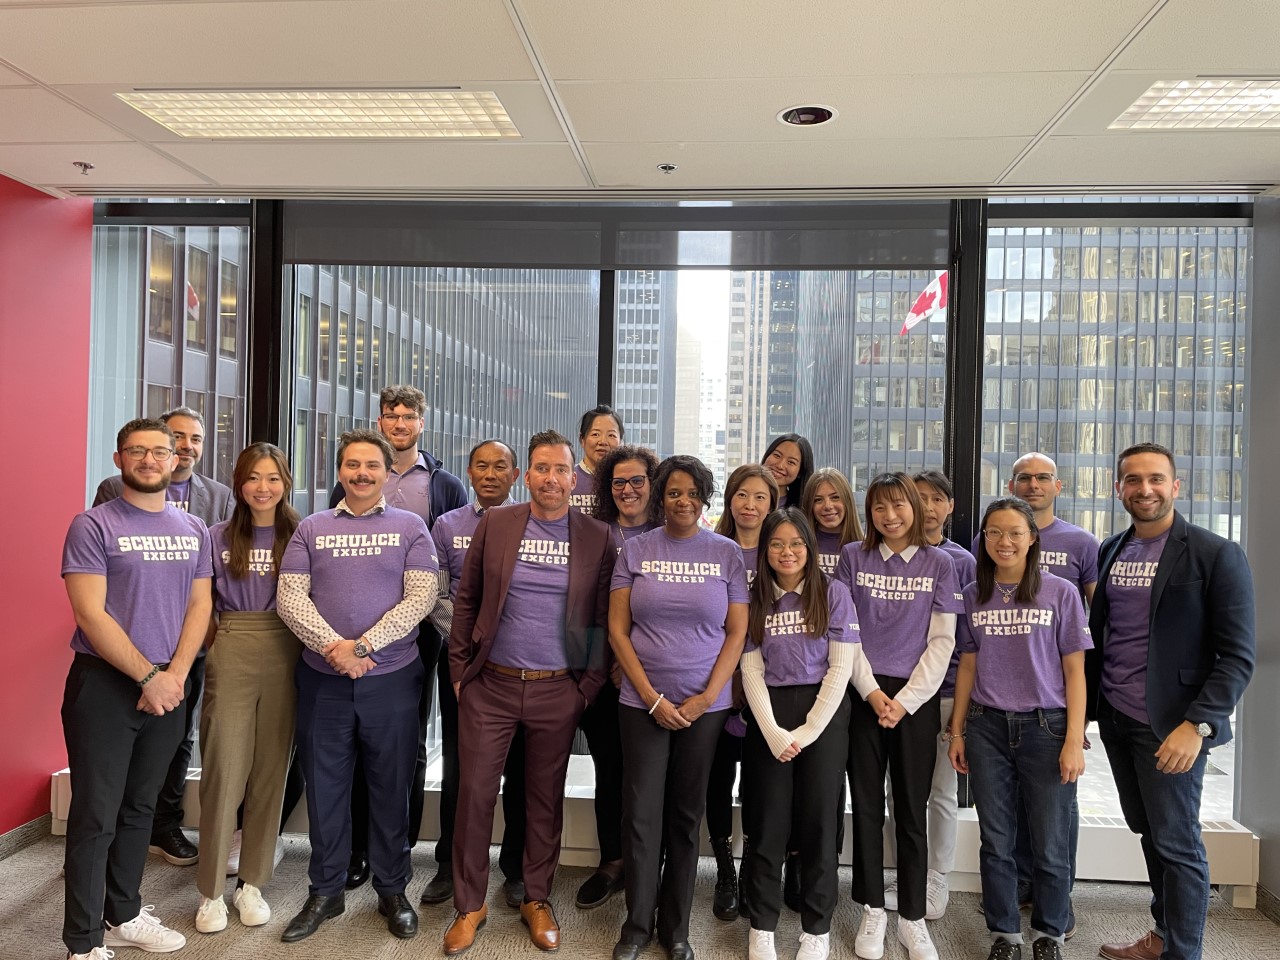 Schulich ExecEd Joins the Ontario Association of Children’s Aid Societies for The Provincial Dress Purple Day Campaign